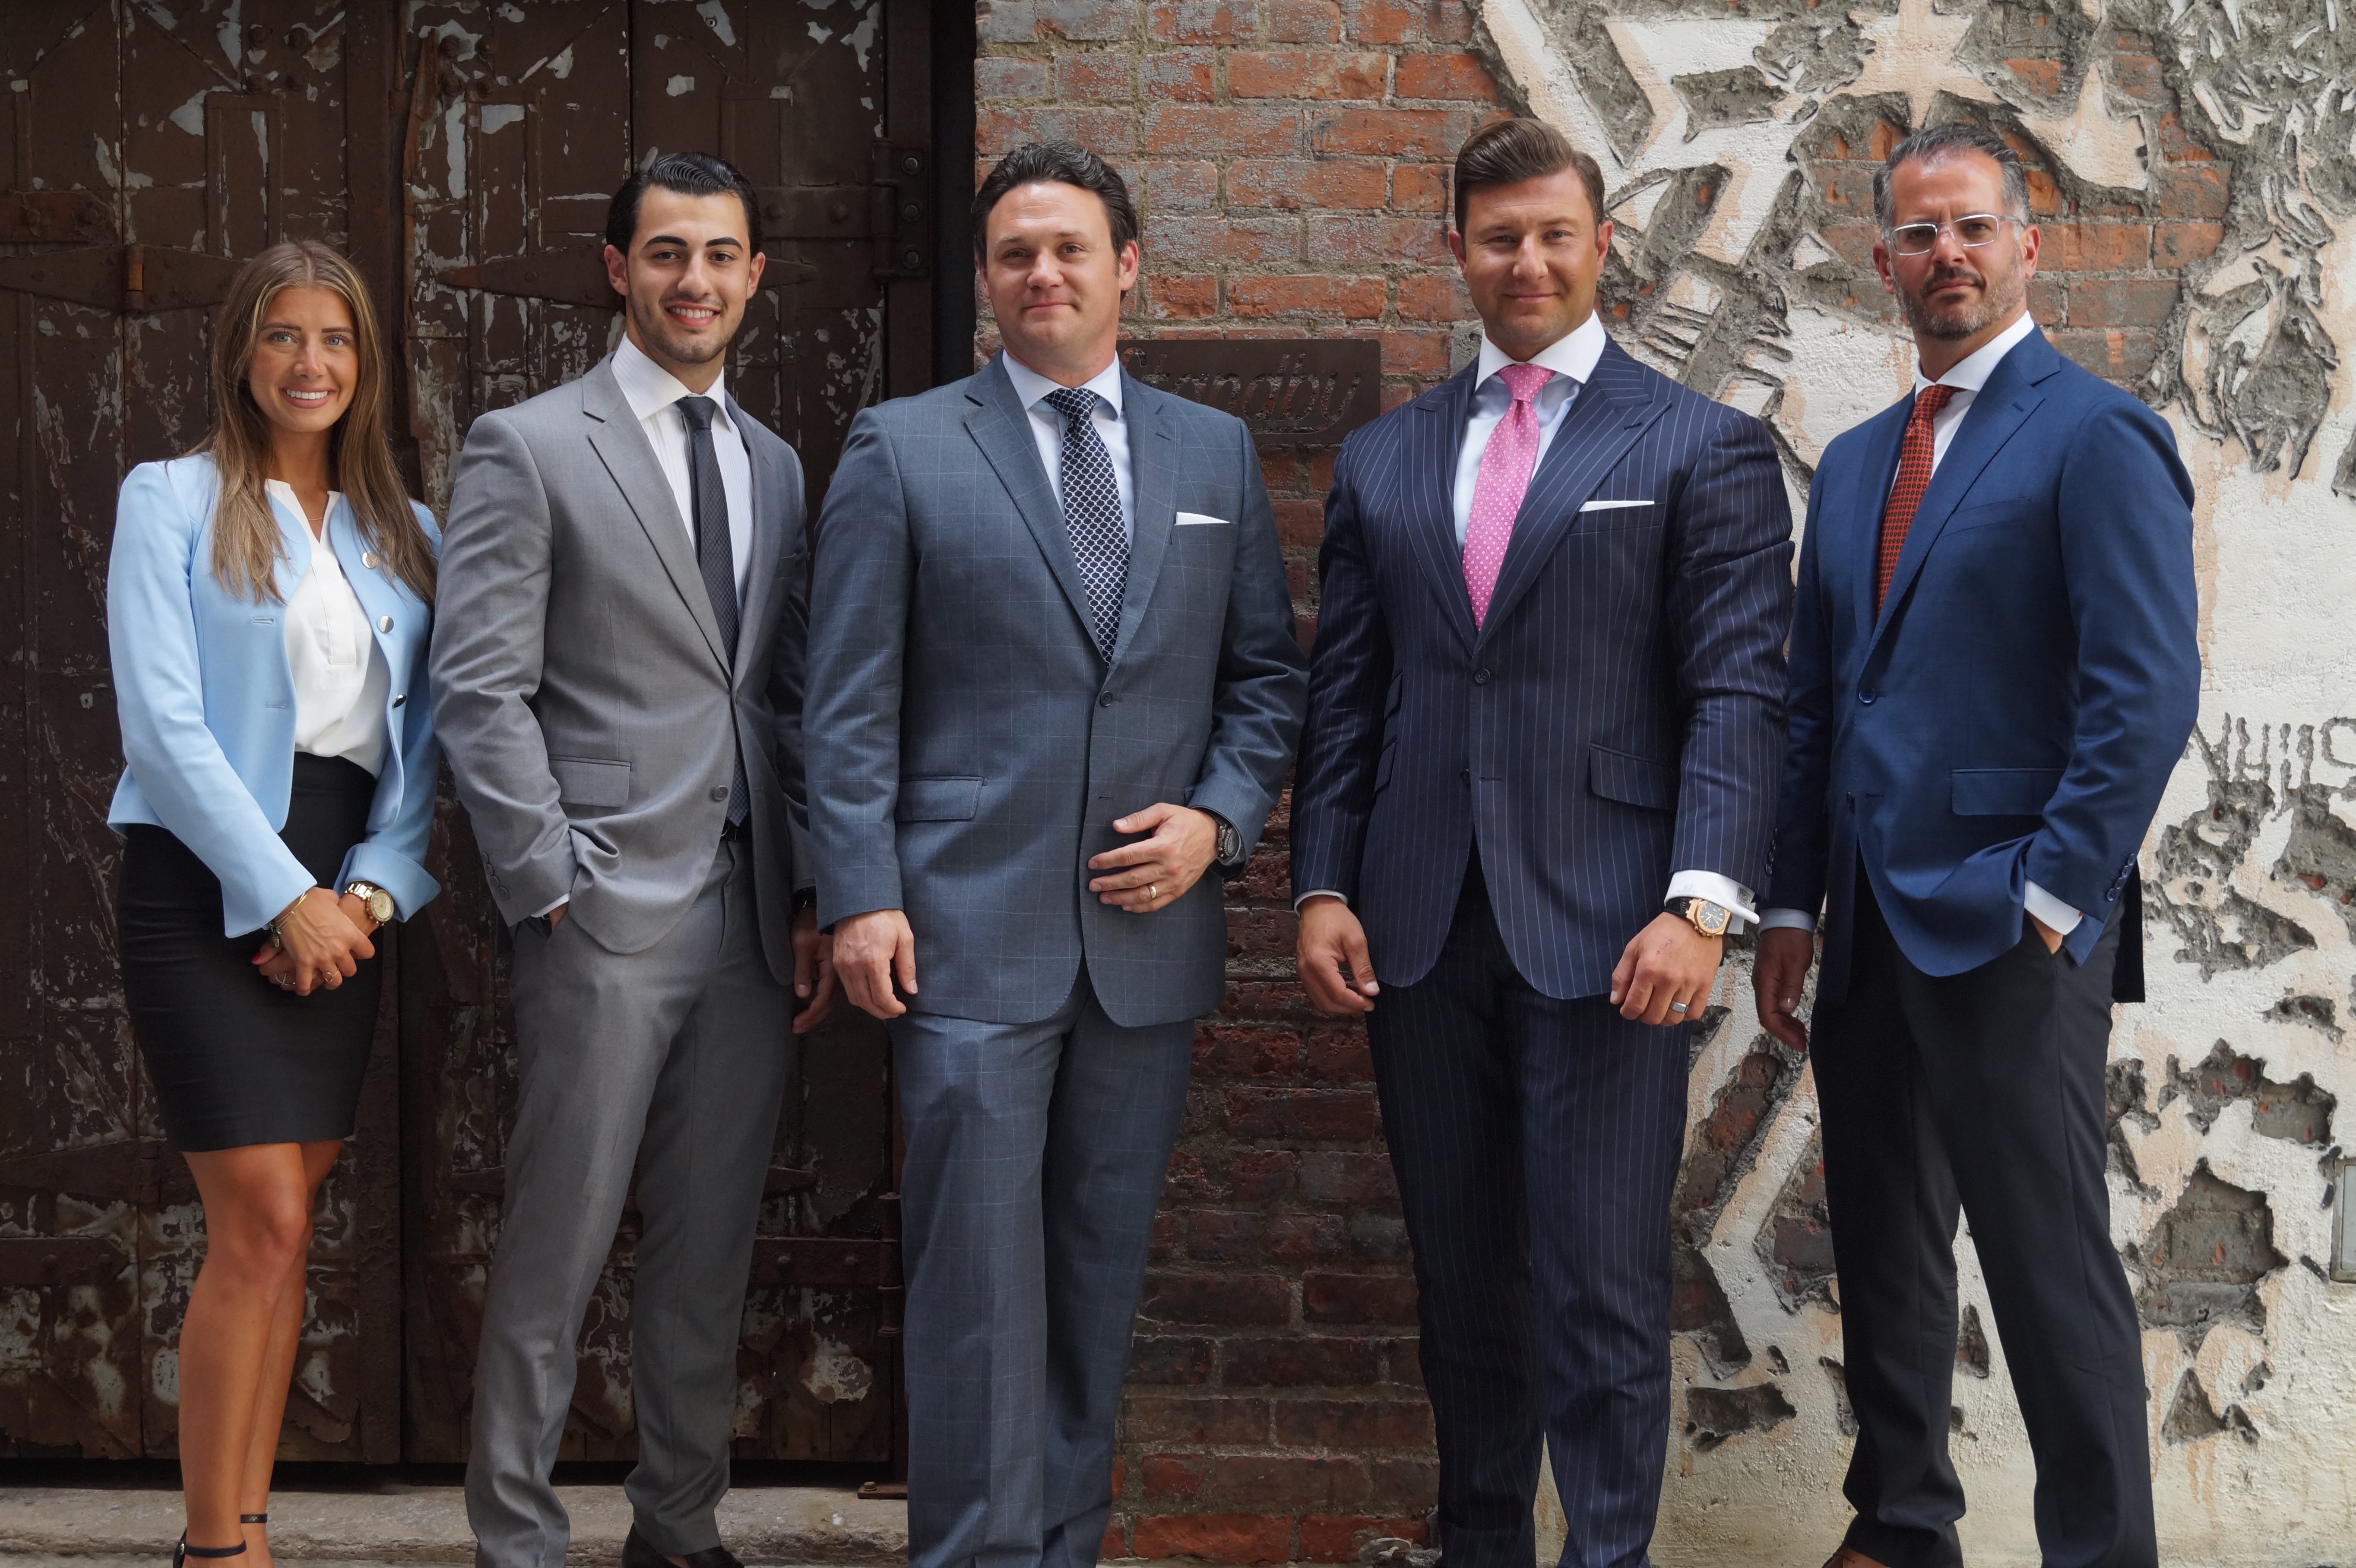 The ICONIC Real Estate team is comprised of industry professionals with a range of experience in commercial brokerage. (L-R: Morgan Macholda, Tim Shayoka, Kees Janeway, Jacob Sworski, Jeff Hillman)